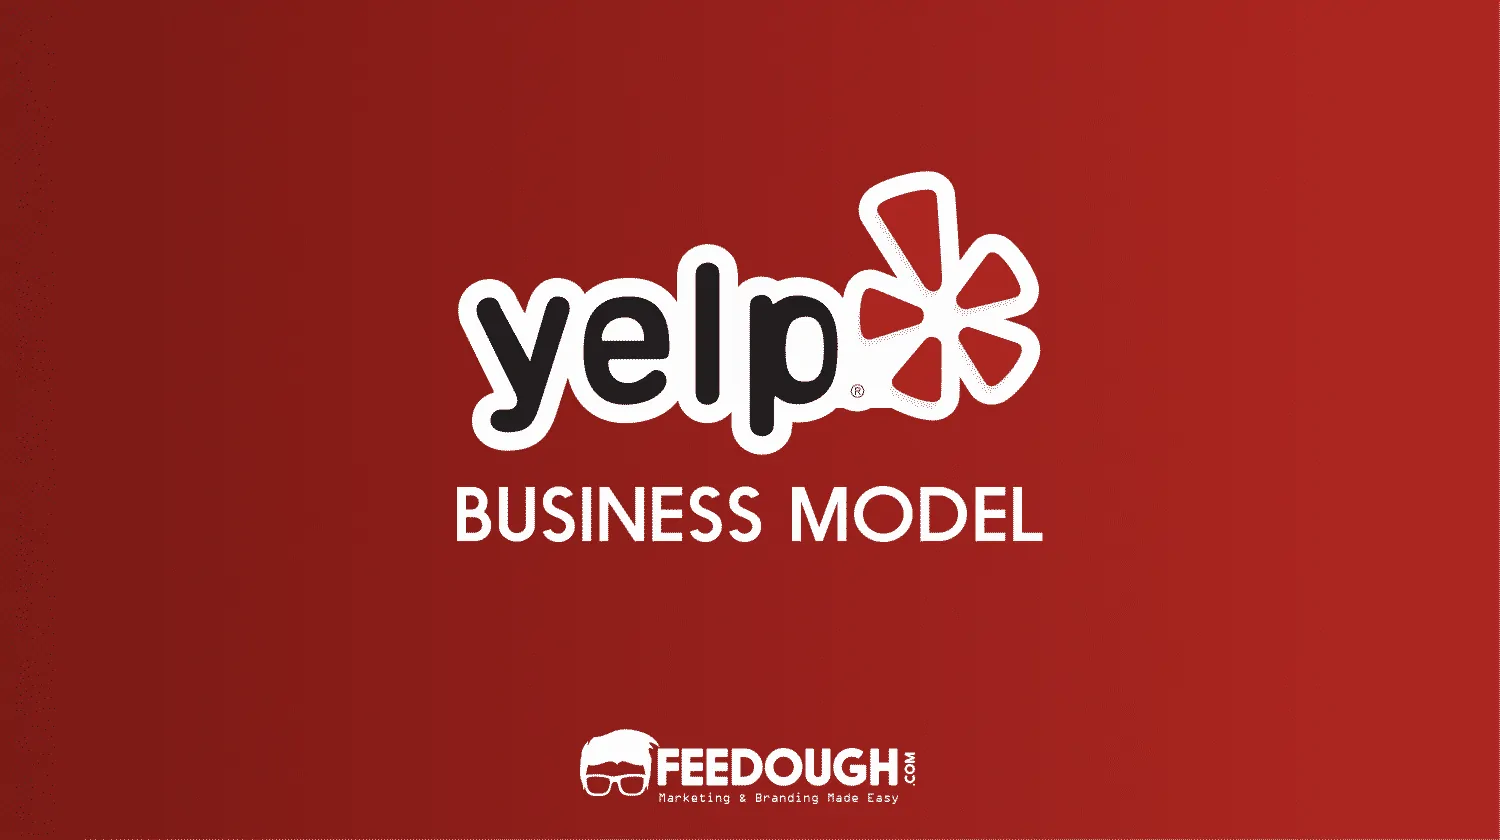 Yelp Business Model | How Does Yelp Make Money?